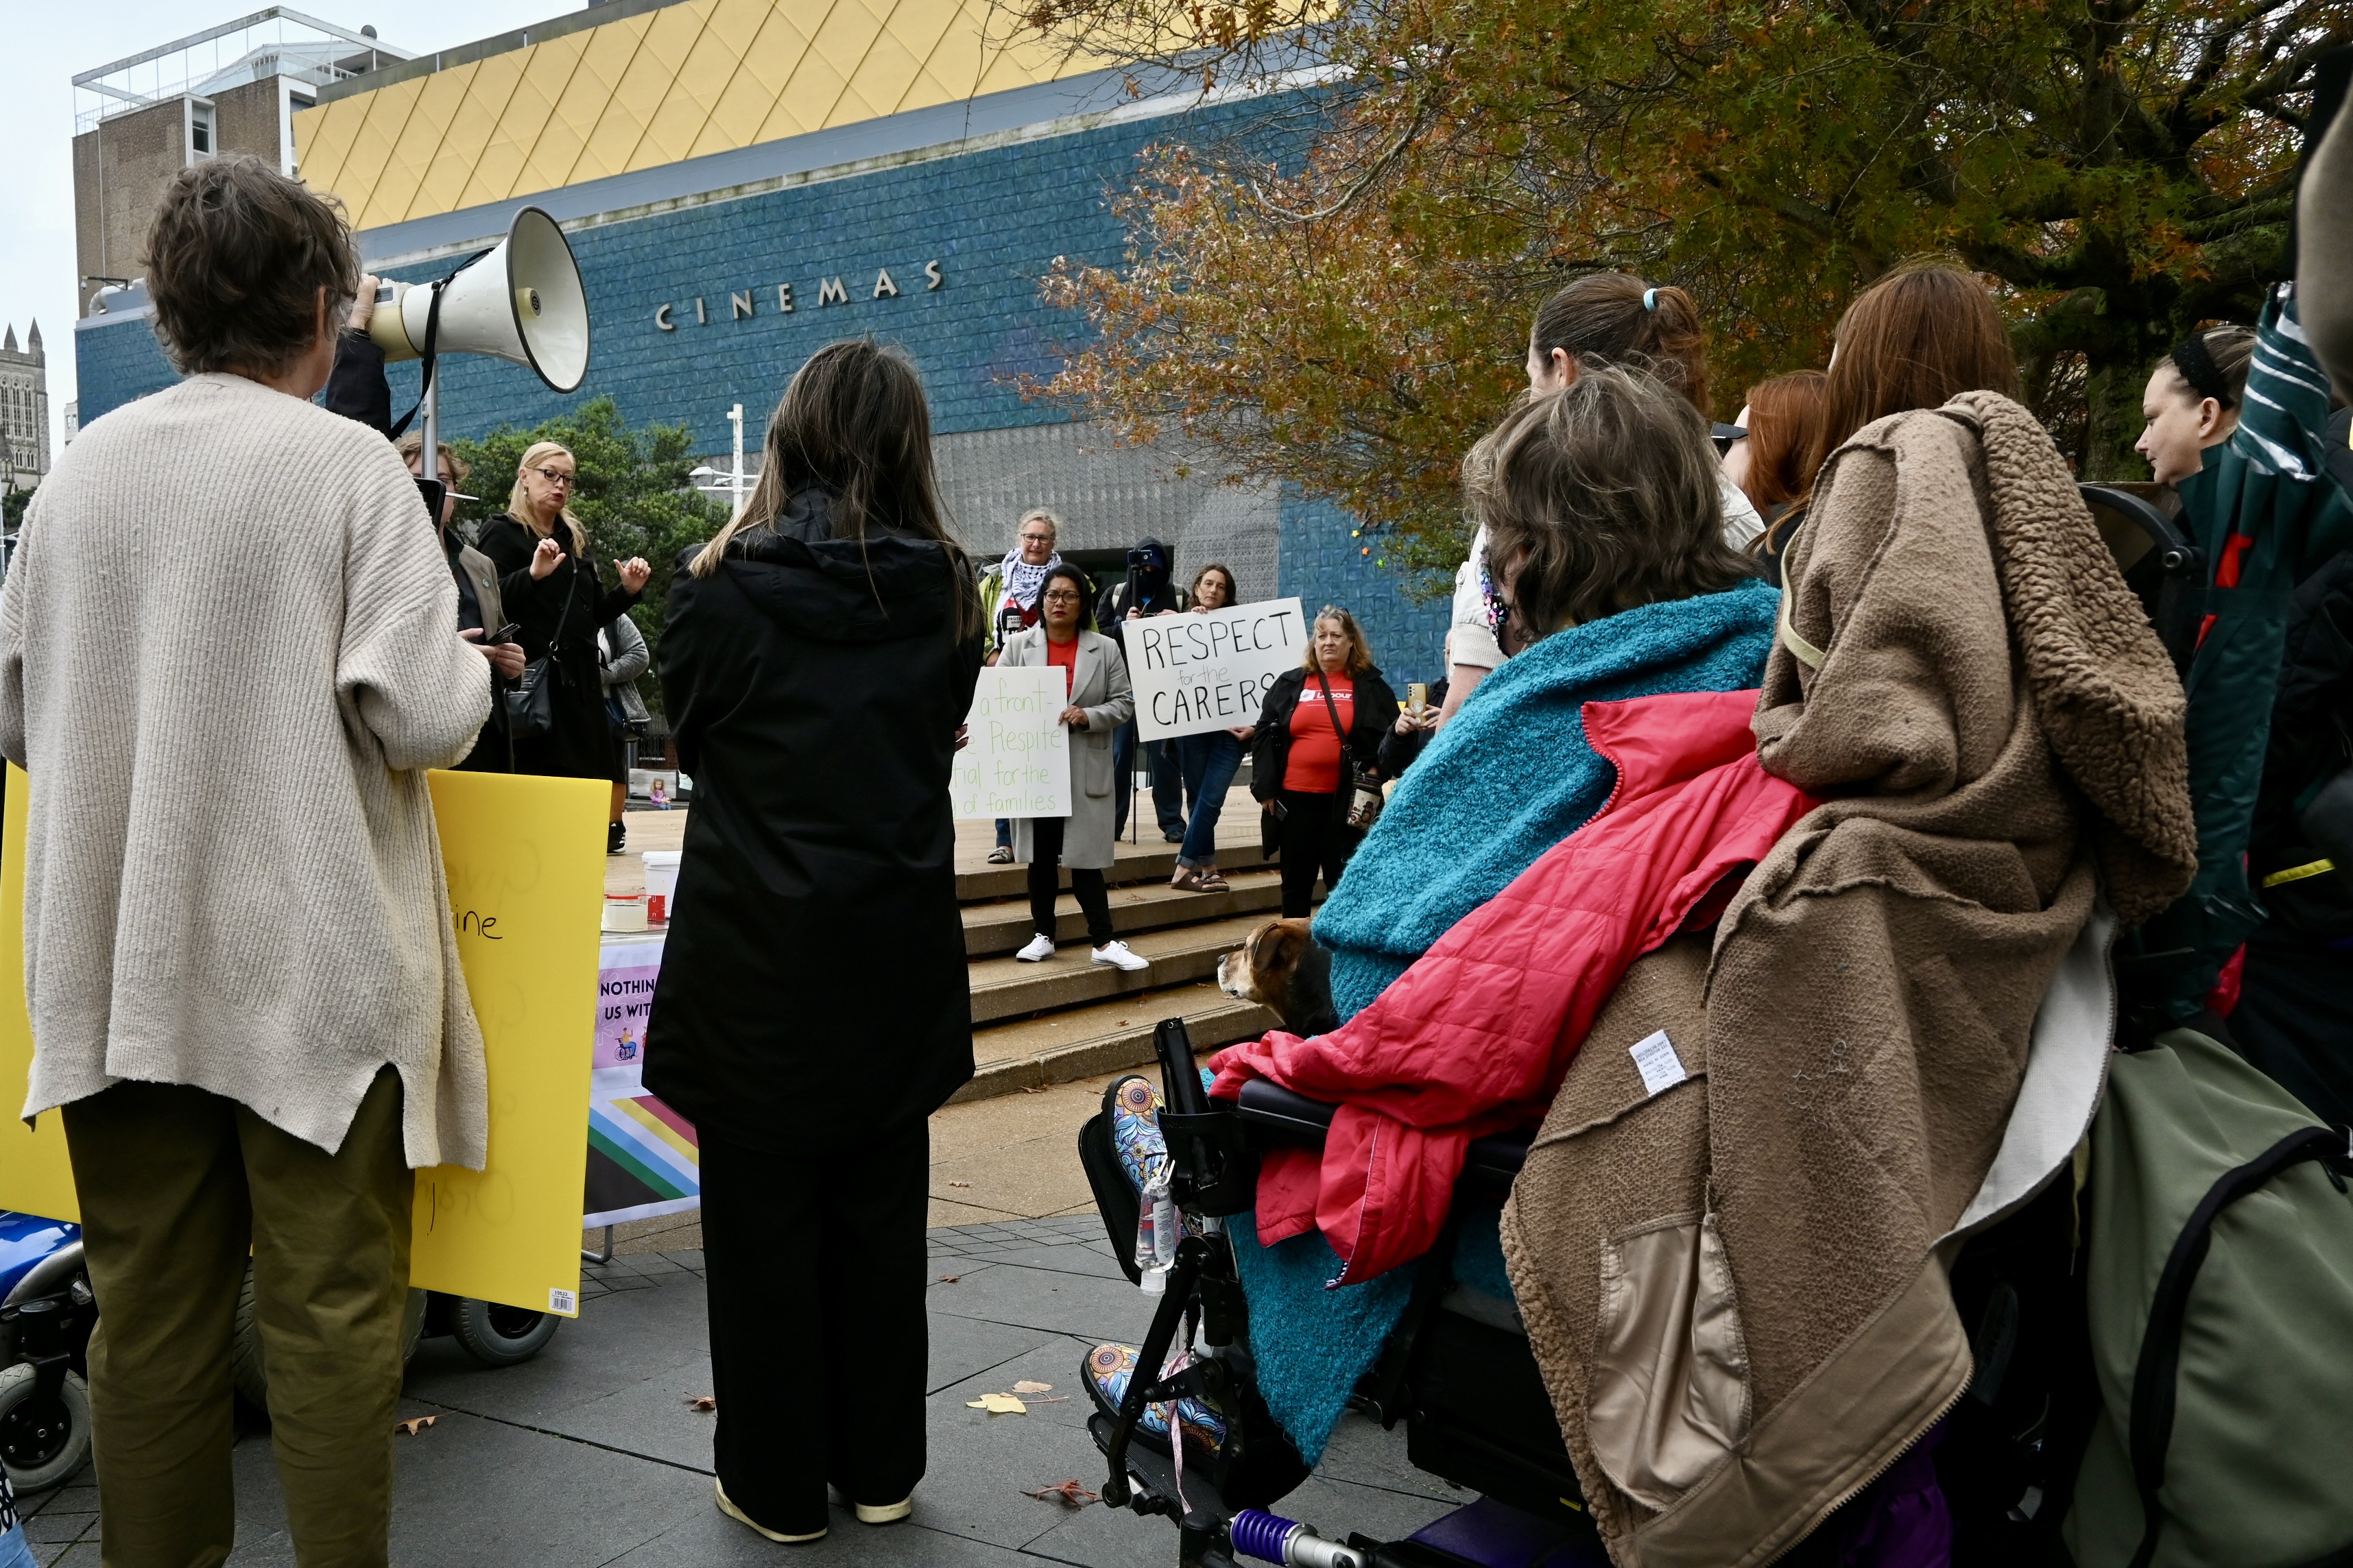 A crowd of protestors listen to speakers at a rally. A sign reads: Respect carers.